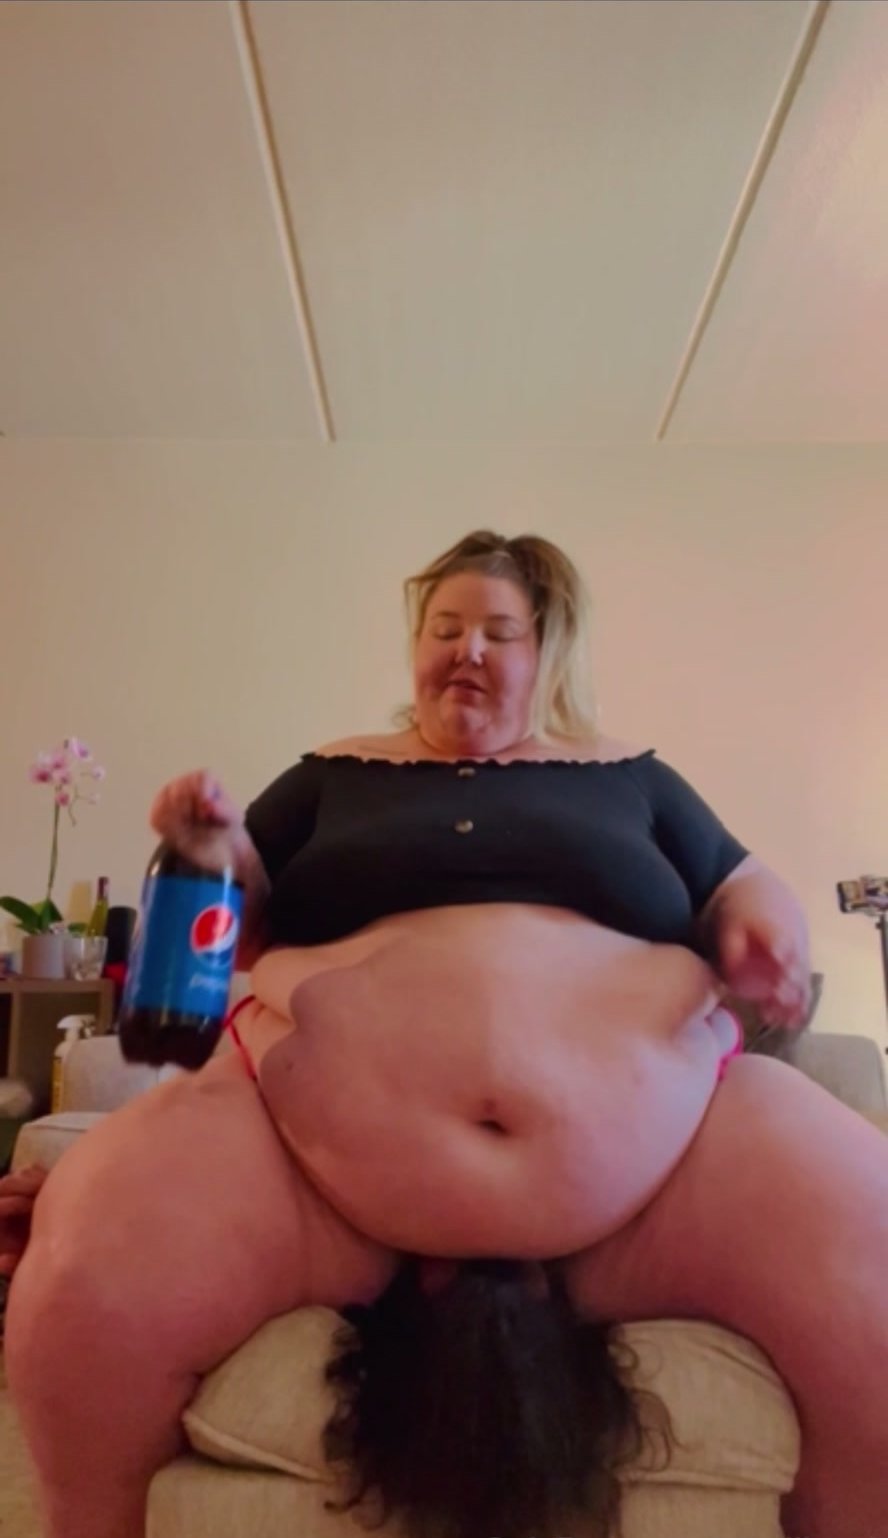 WILL PRIV SOON SSBBW EATS AND DRINKS WHILE RIDING FACE